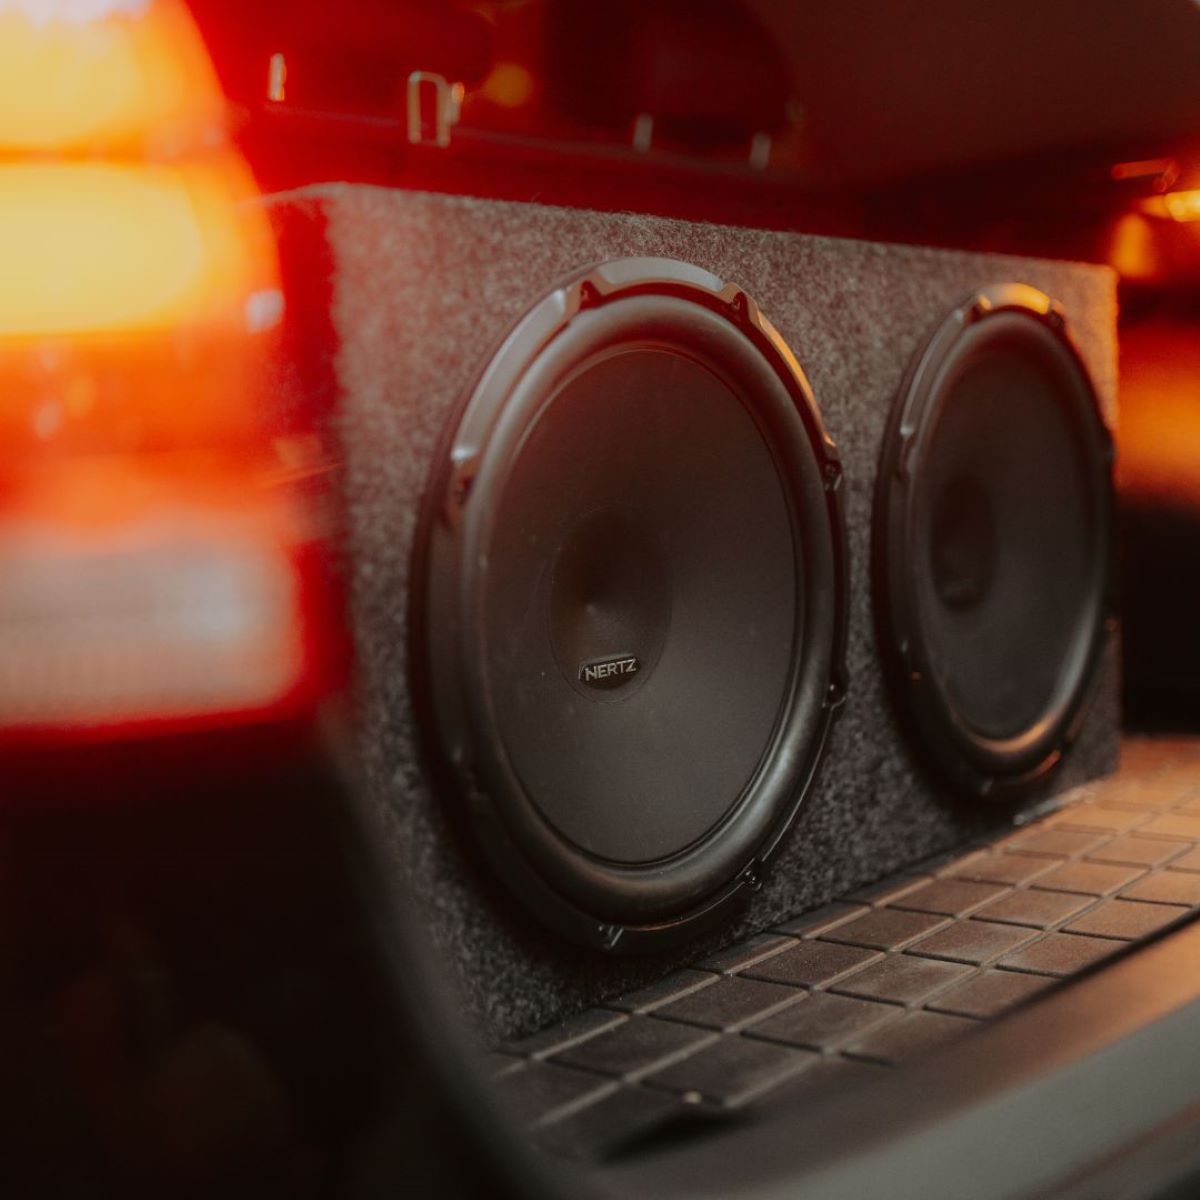 How To Fix Subwoofer Overheating